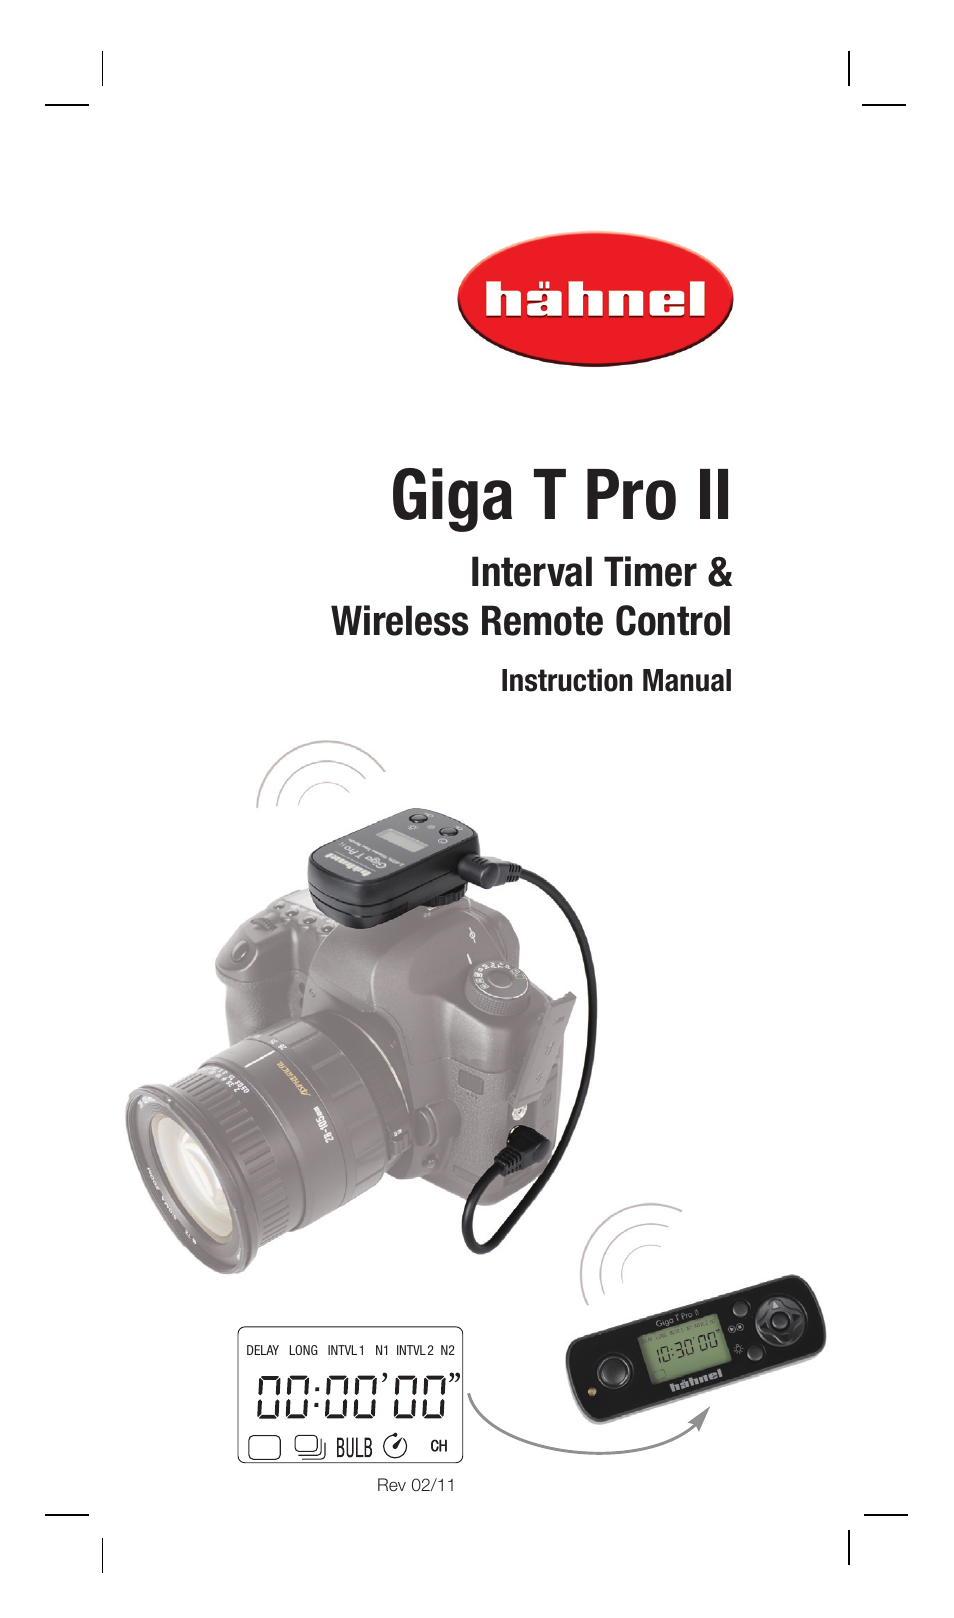 Hahnel Giga T Pro II Wireless Remote Control with Timer and Time Lapse for Panasonic Cameras